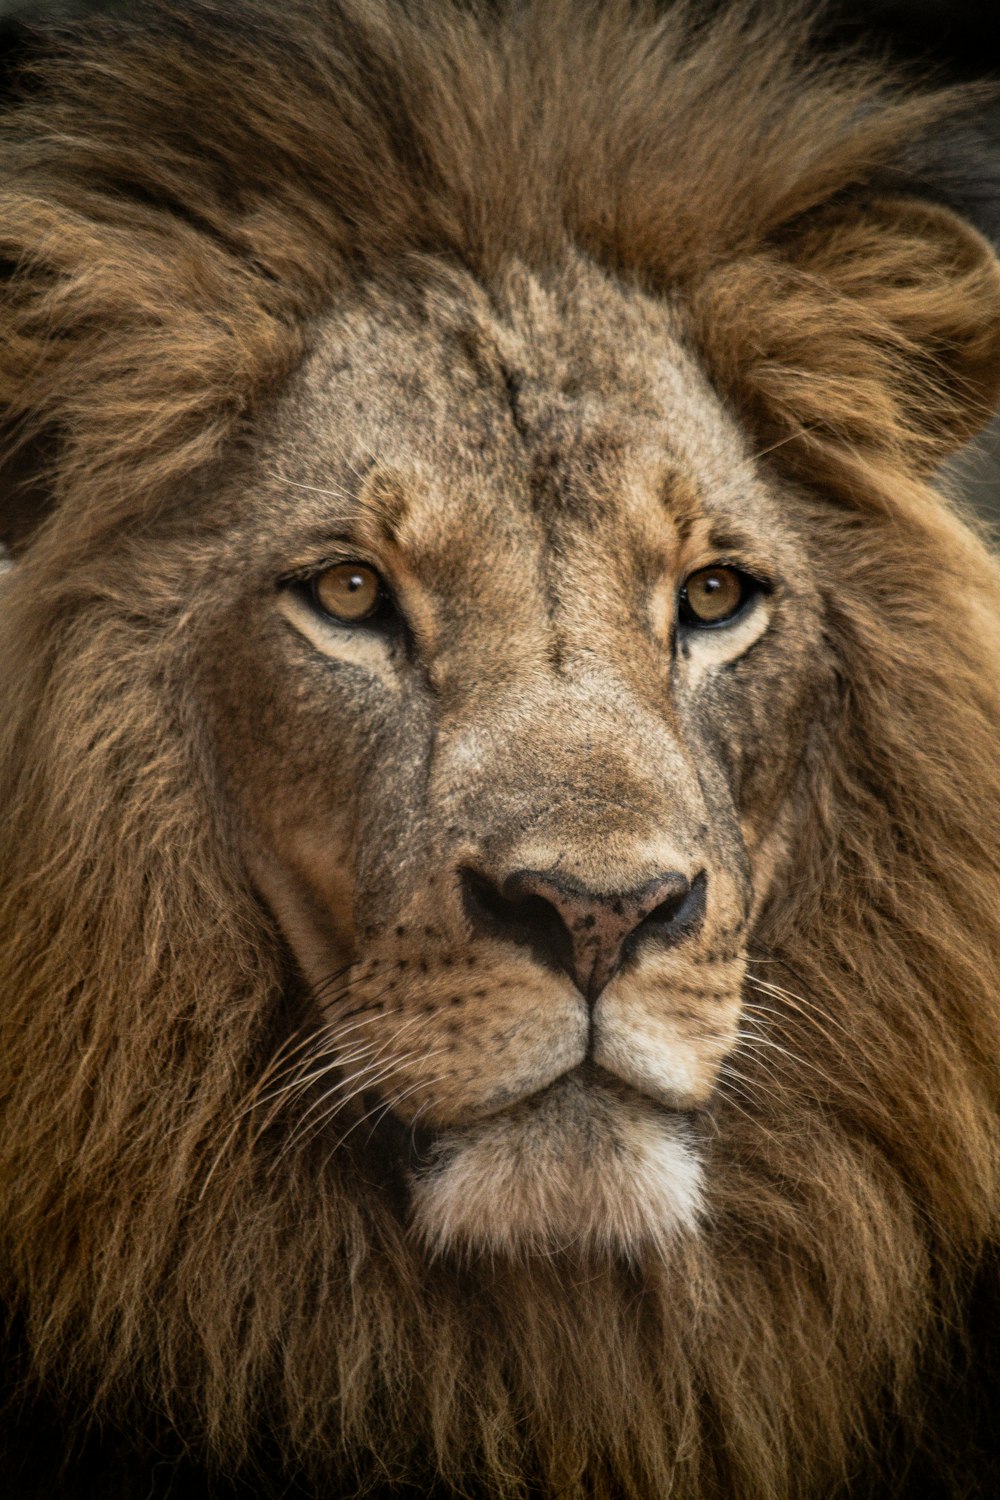 lion in close up shot